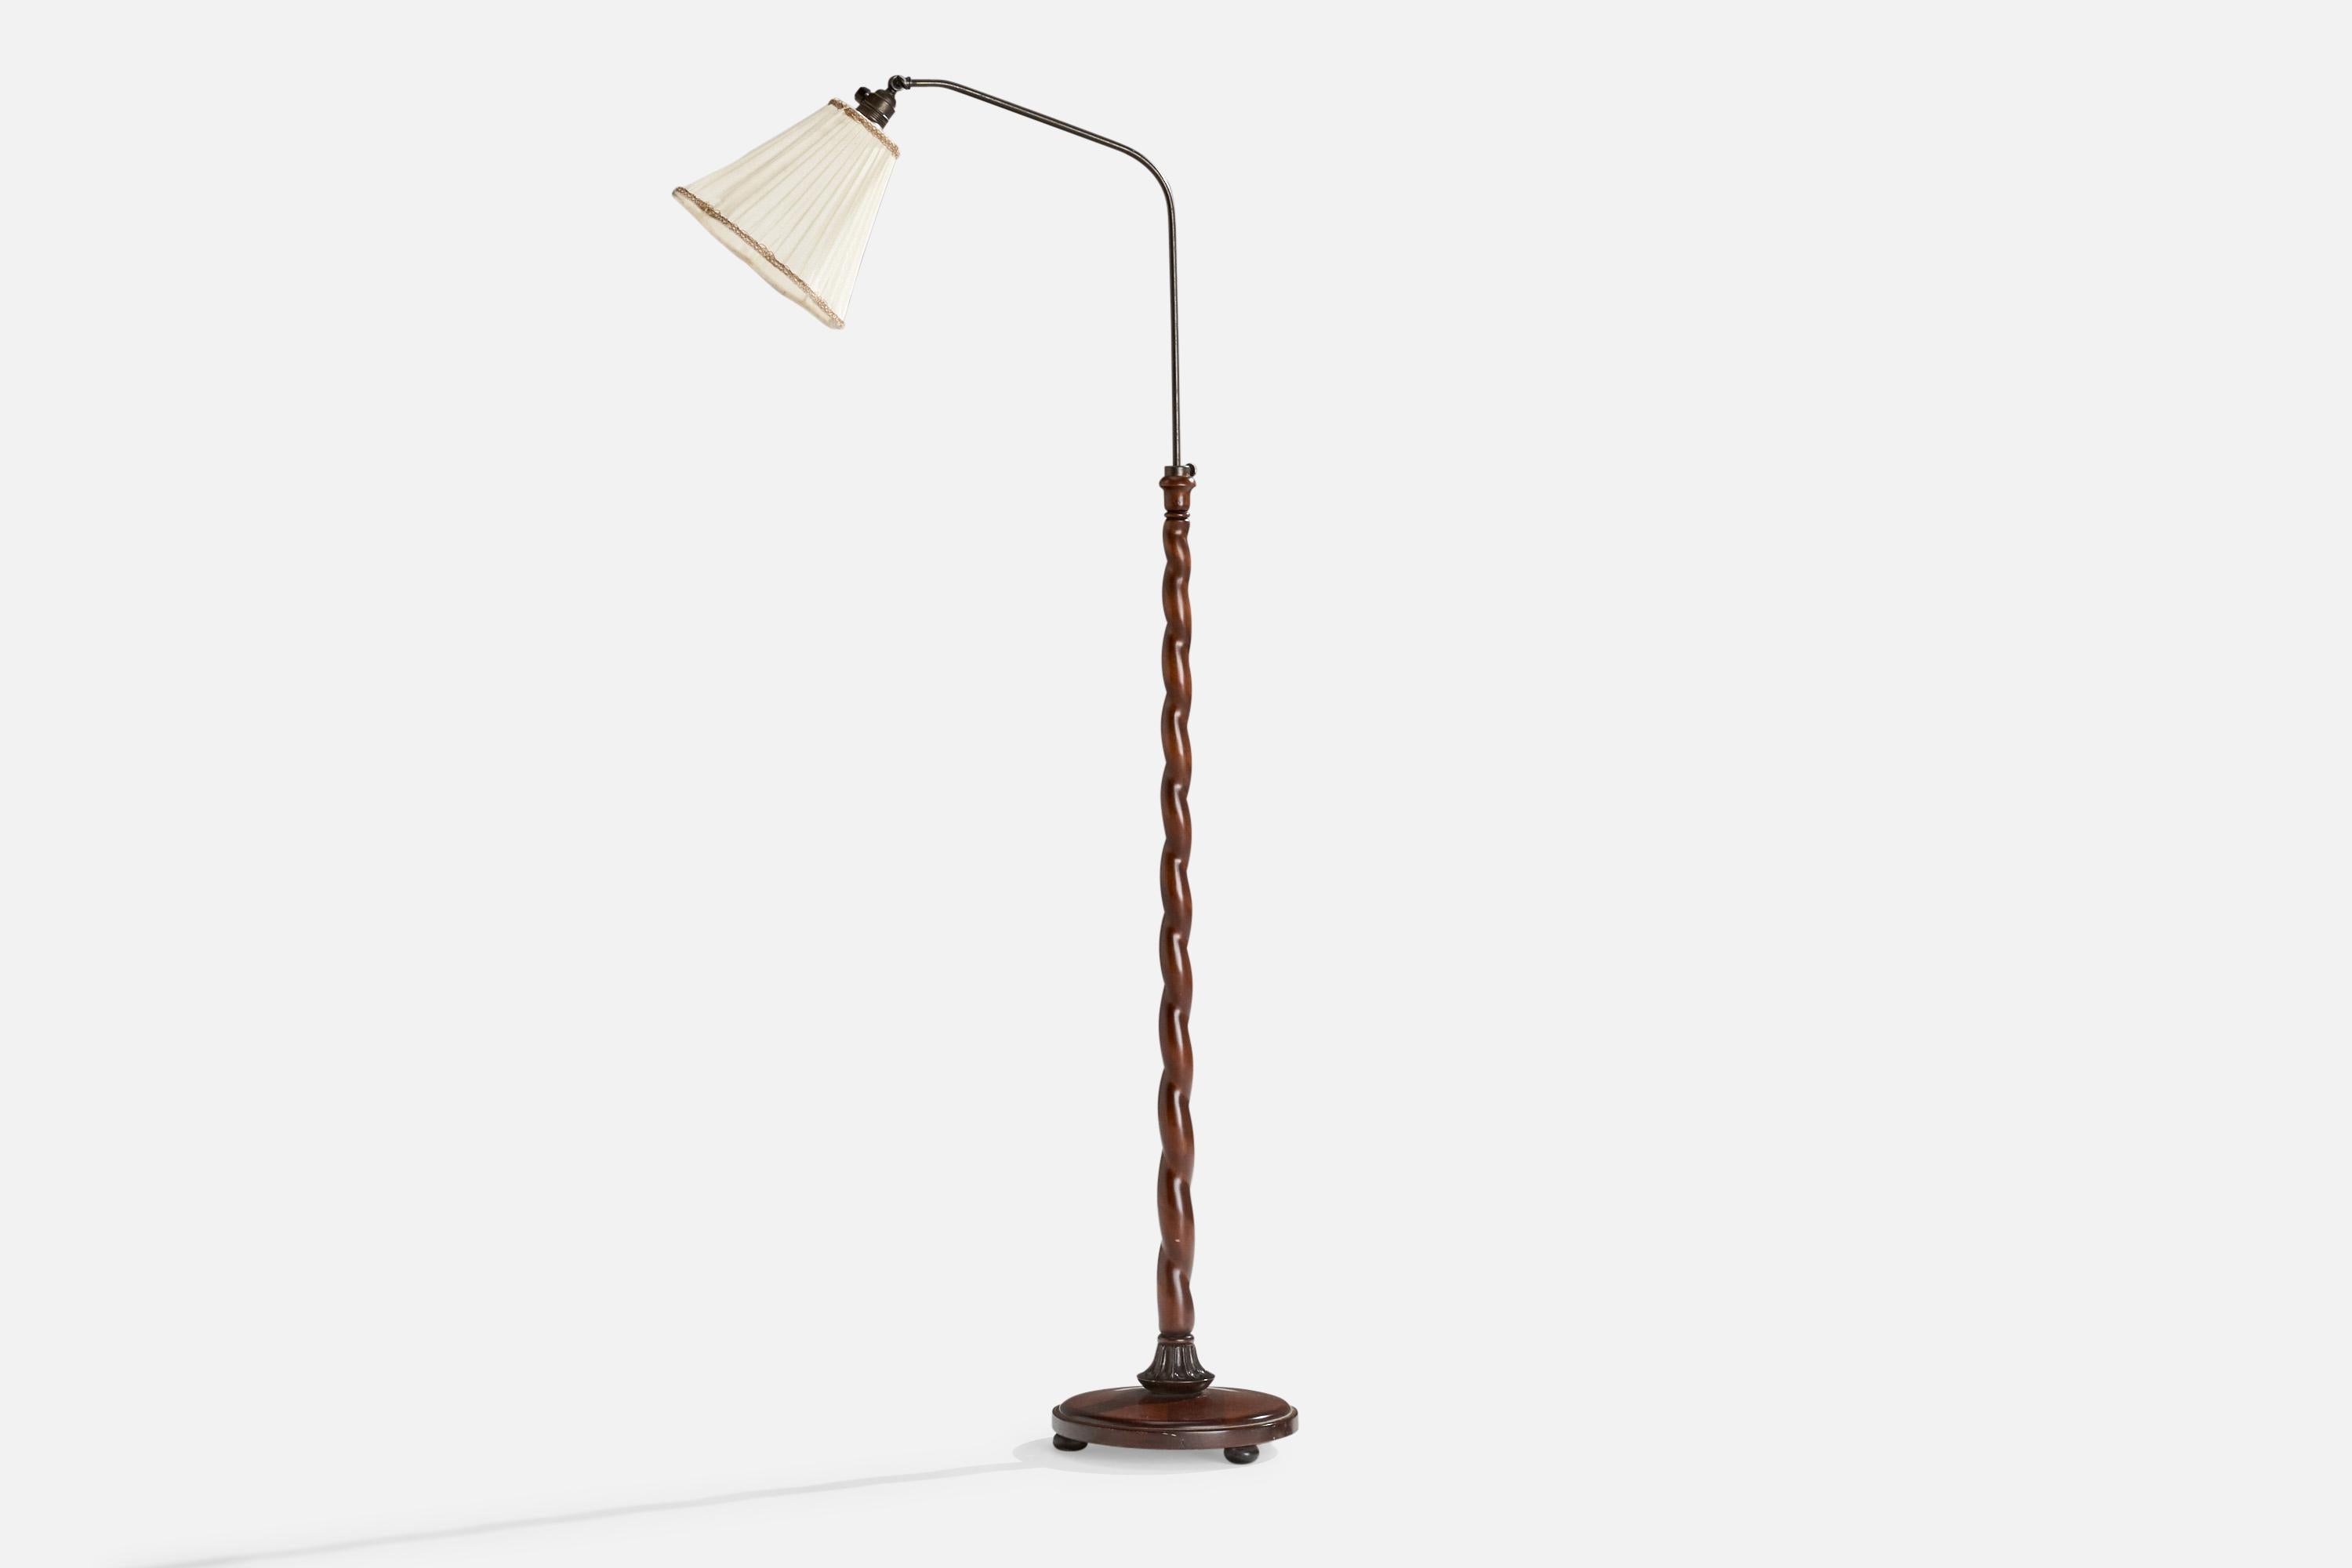 An adjustable brass, wood and off white fabric floor lamp designed and produced in Sweden, c. 1930s.

Dimensions variable 
Overall Dimensions (inches): 52” H x 9.5” W x 25” D
Stated dimensions include shade.
Bulb Specifications: E-26 Bulb
Number of